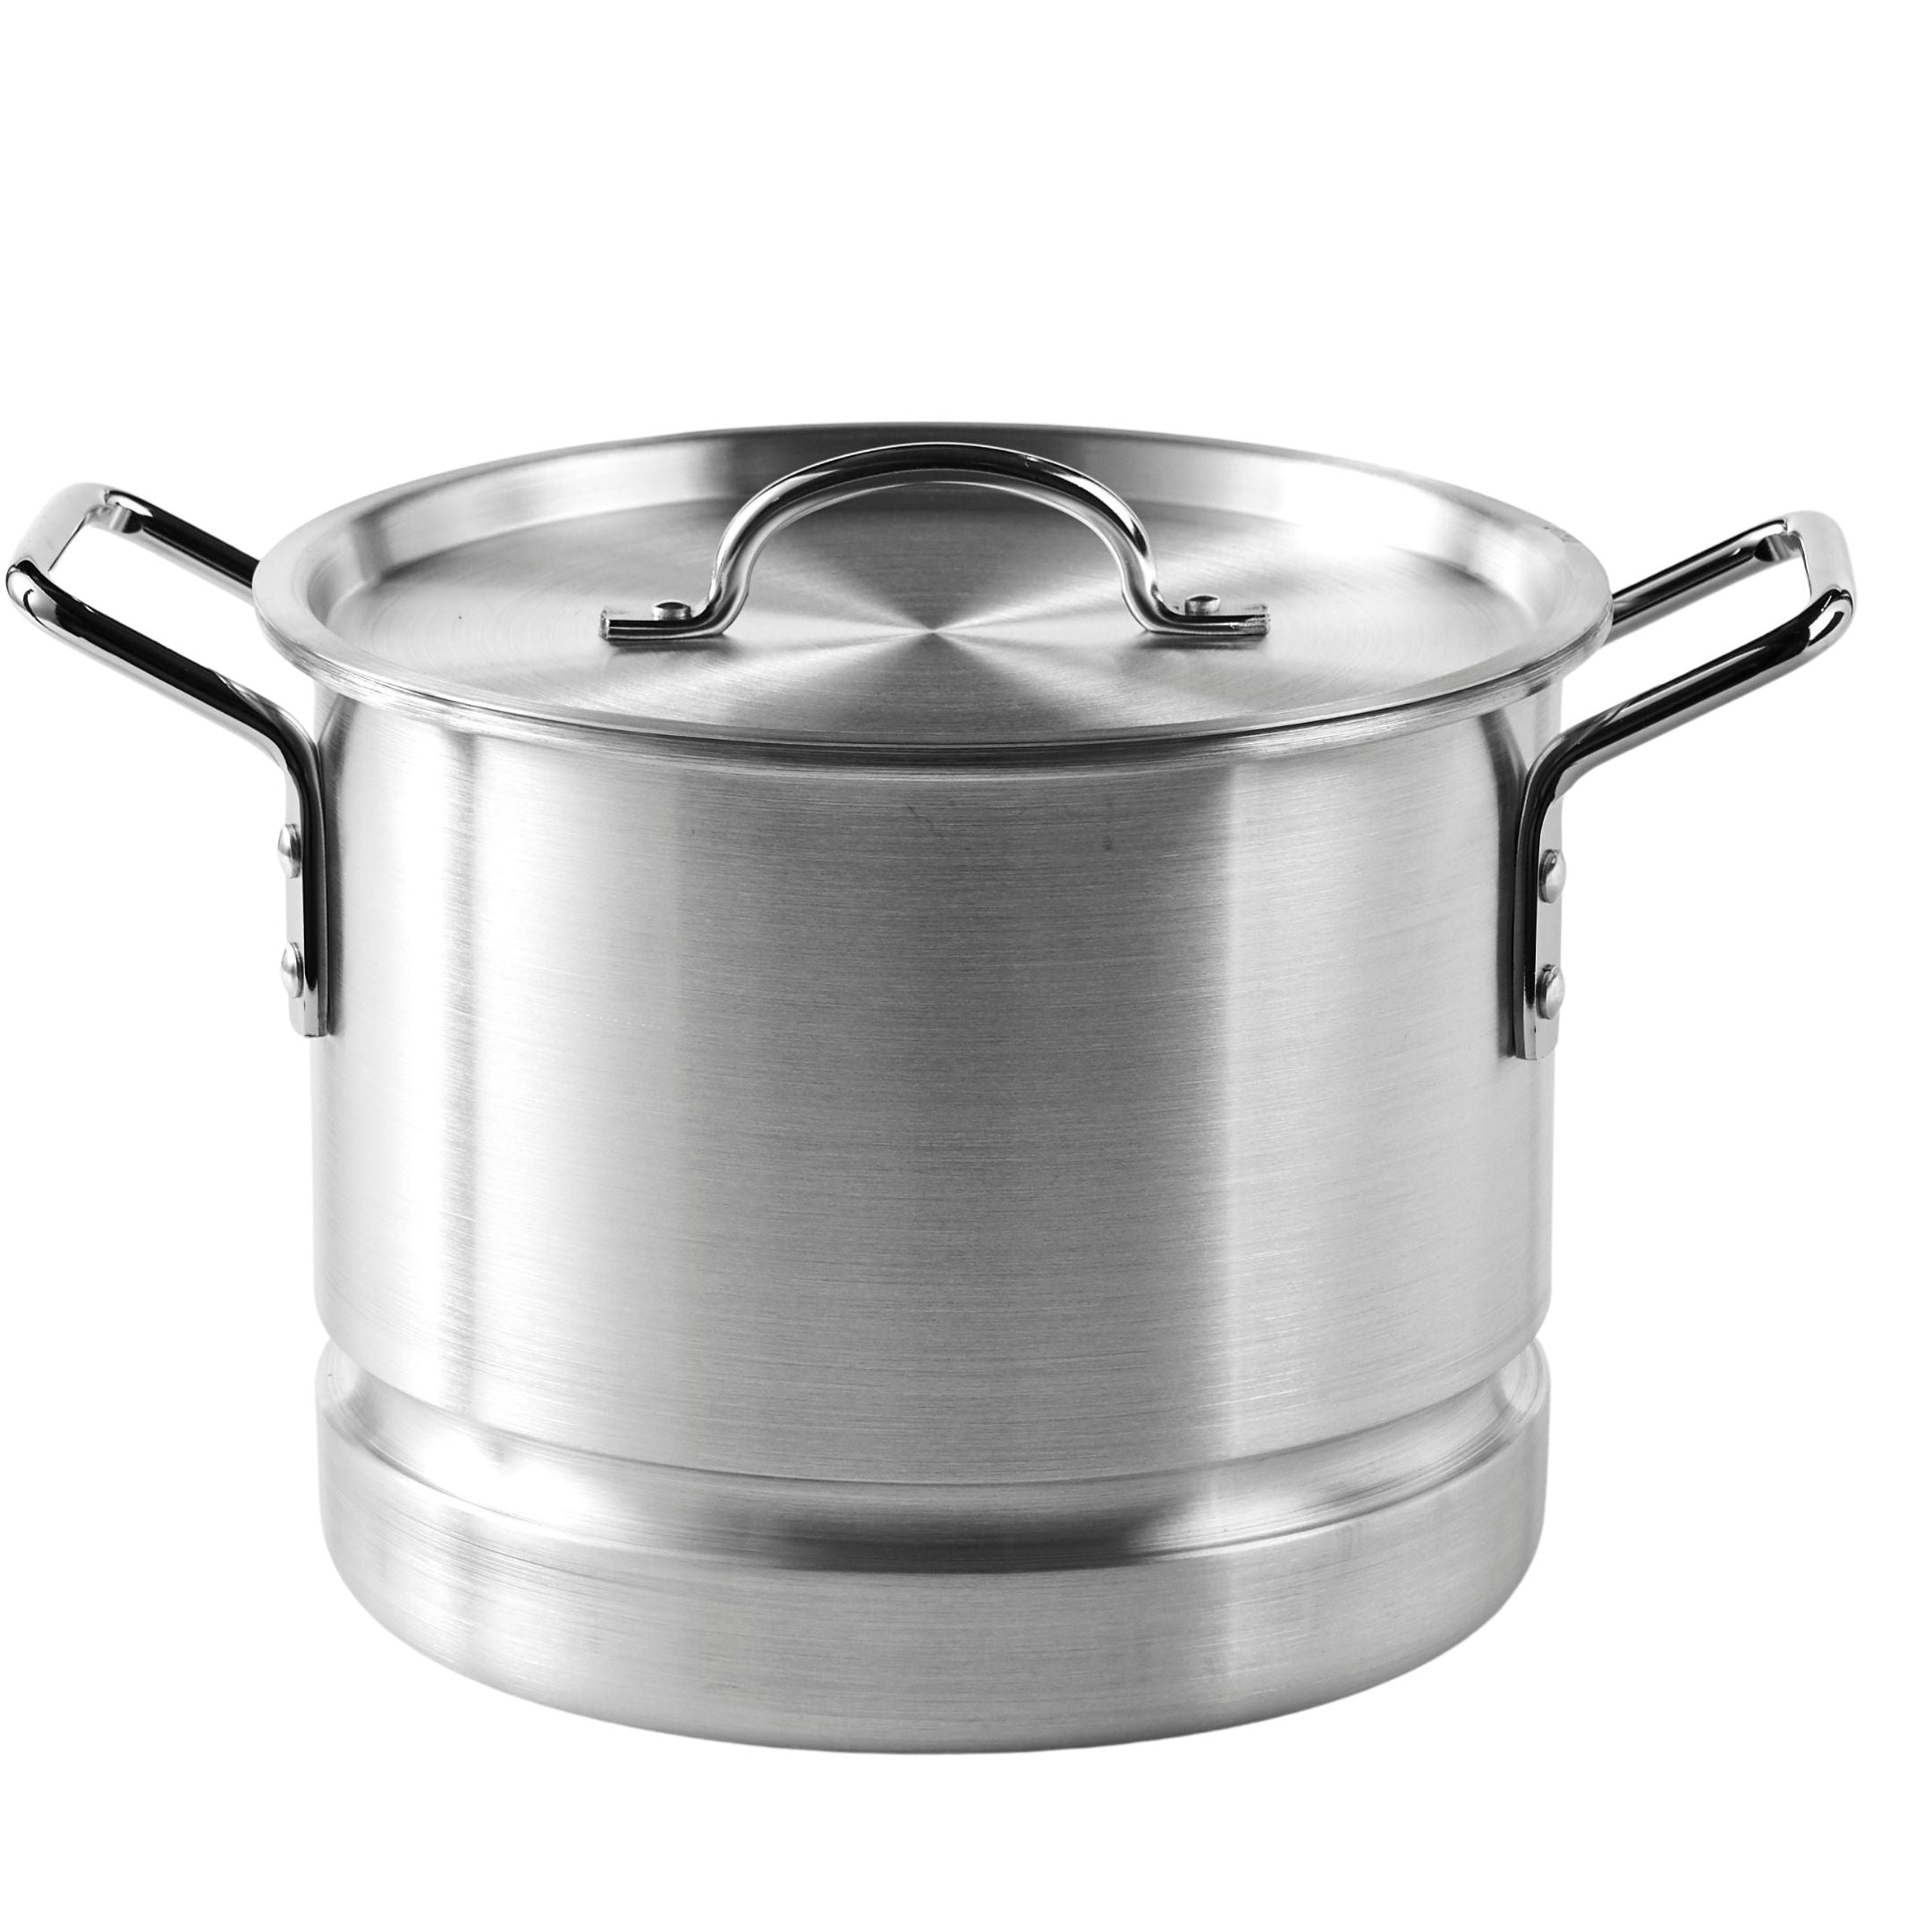 IMUSA Mexicana 24 qt. Aluminum Stovetop Steamer with Glass Lid MEXICANA-424  - The Home Depot